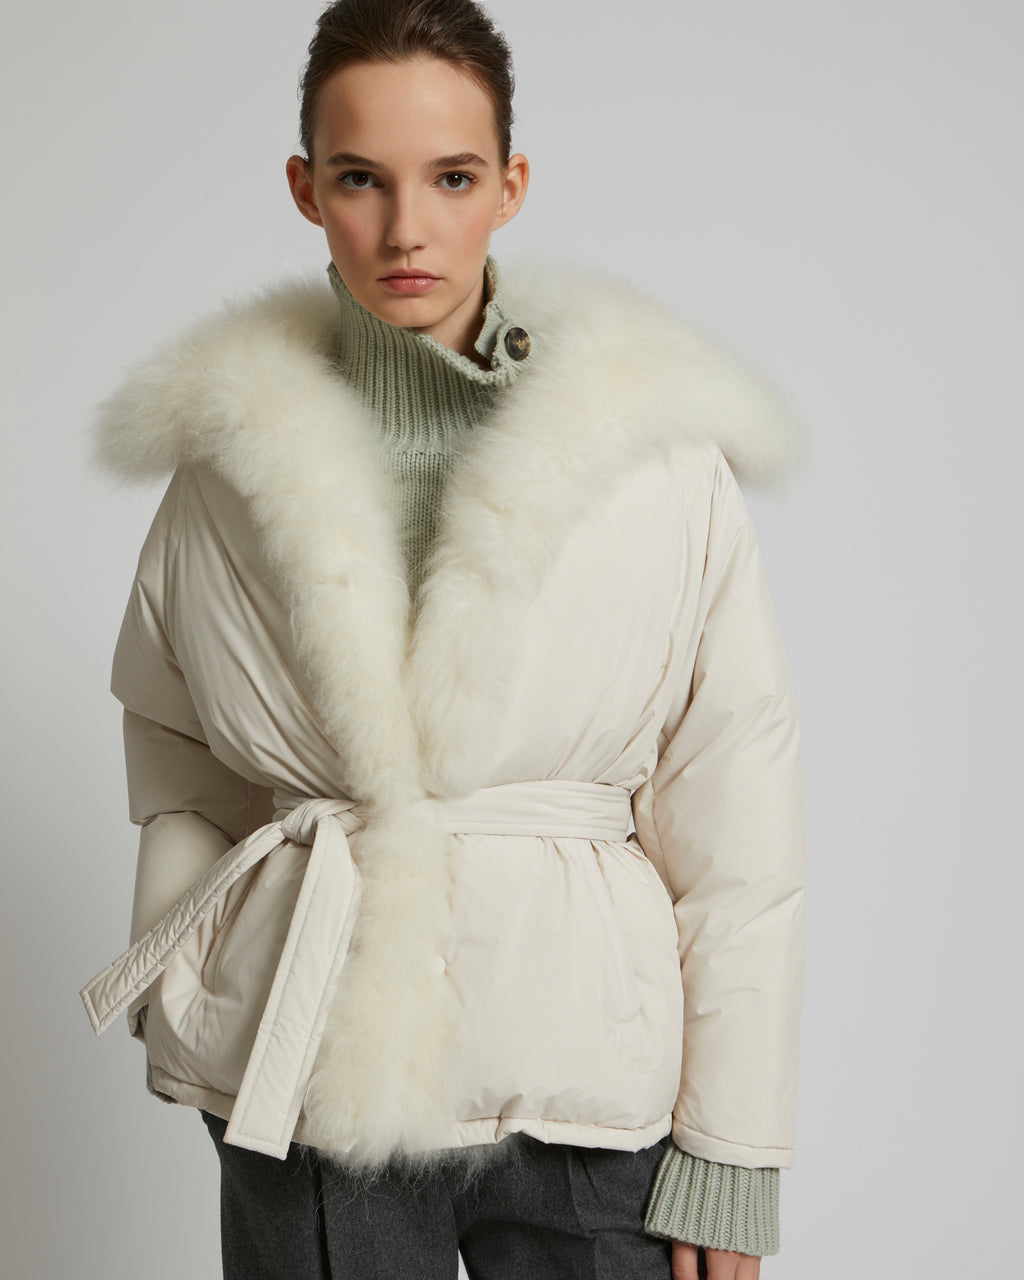 jacket - - waterproof fabric Oversized lambskin white technical – down long-haired Yves in US and Salomon Yves Salomon